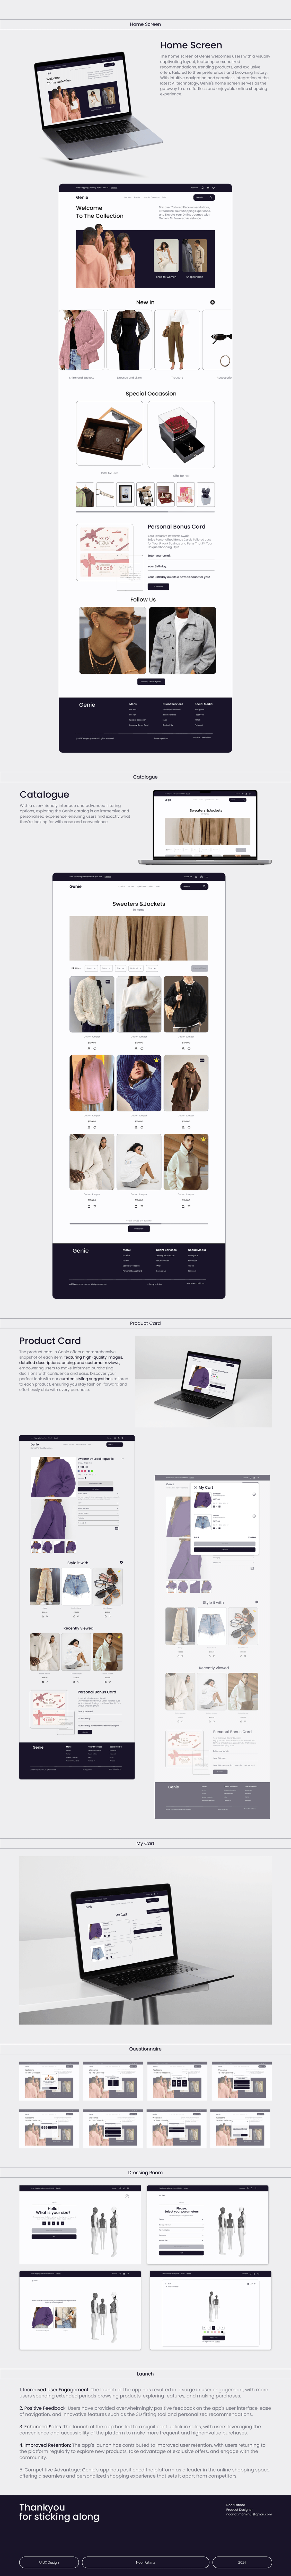 Webdesign uiux Prototyping machine learning Virtual reality virtual assistant UX process Case Study Figma Website